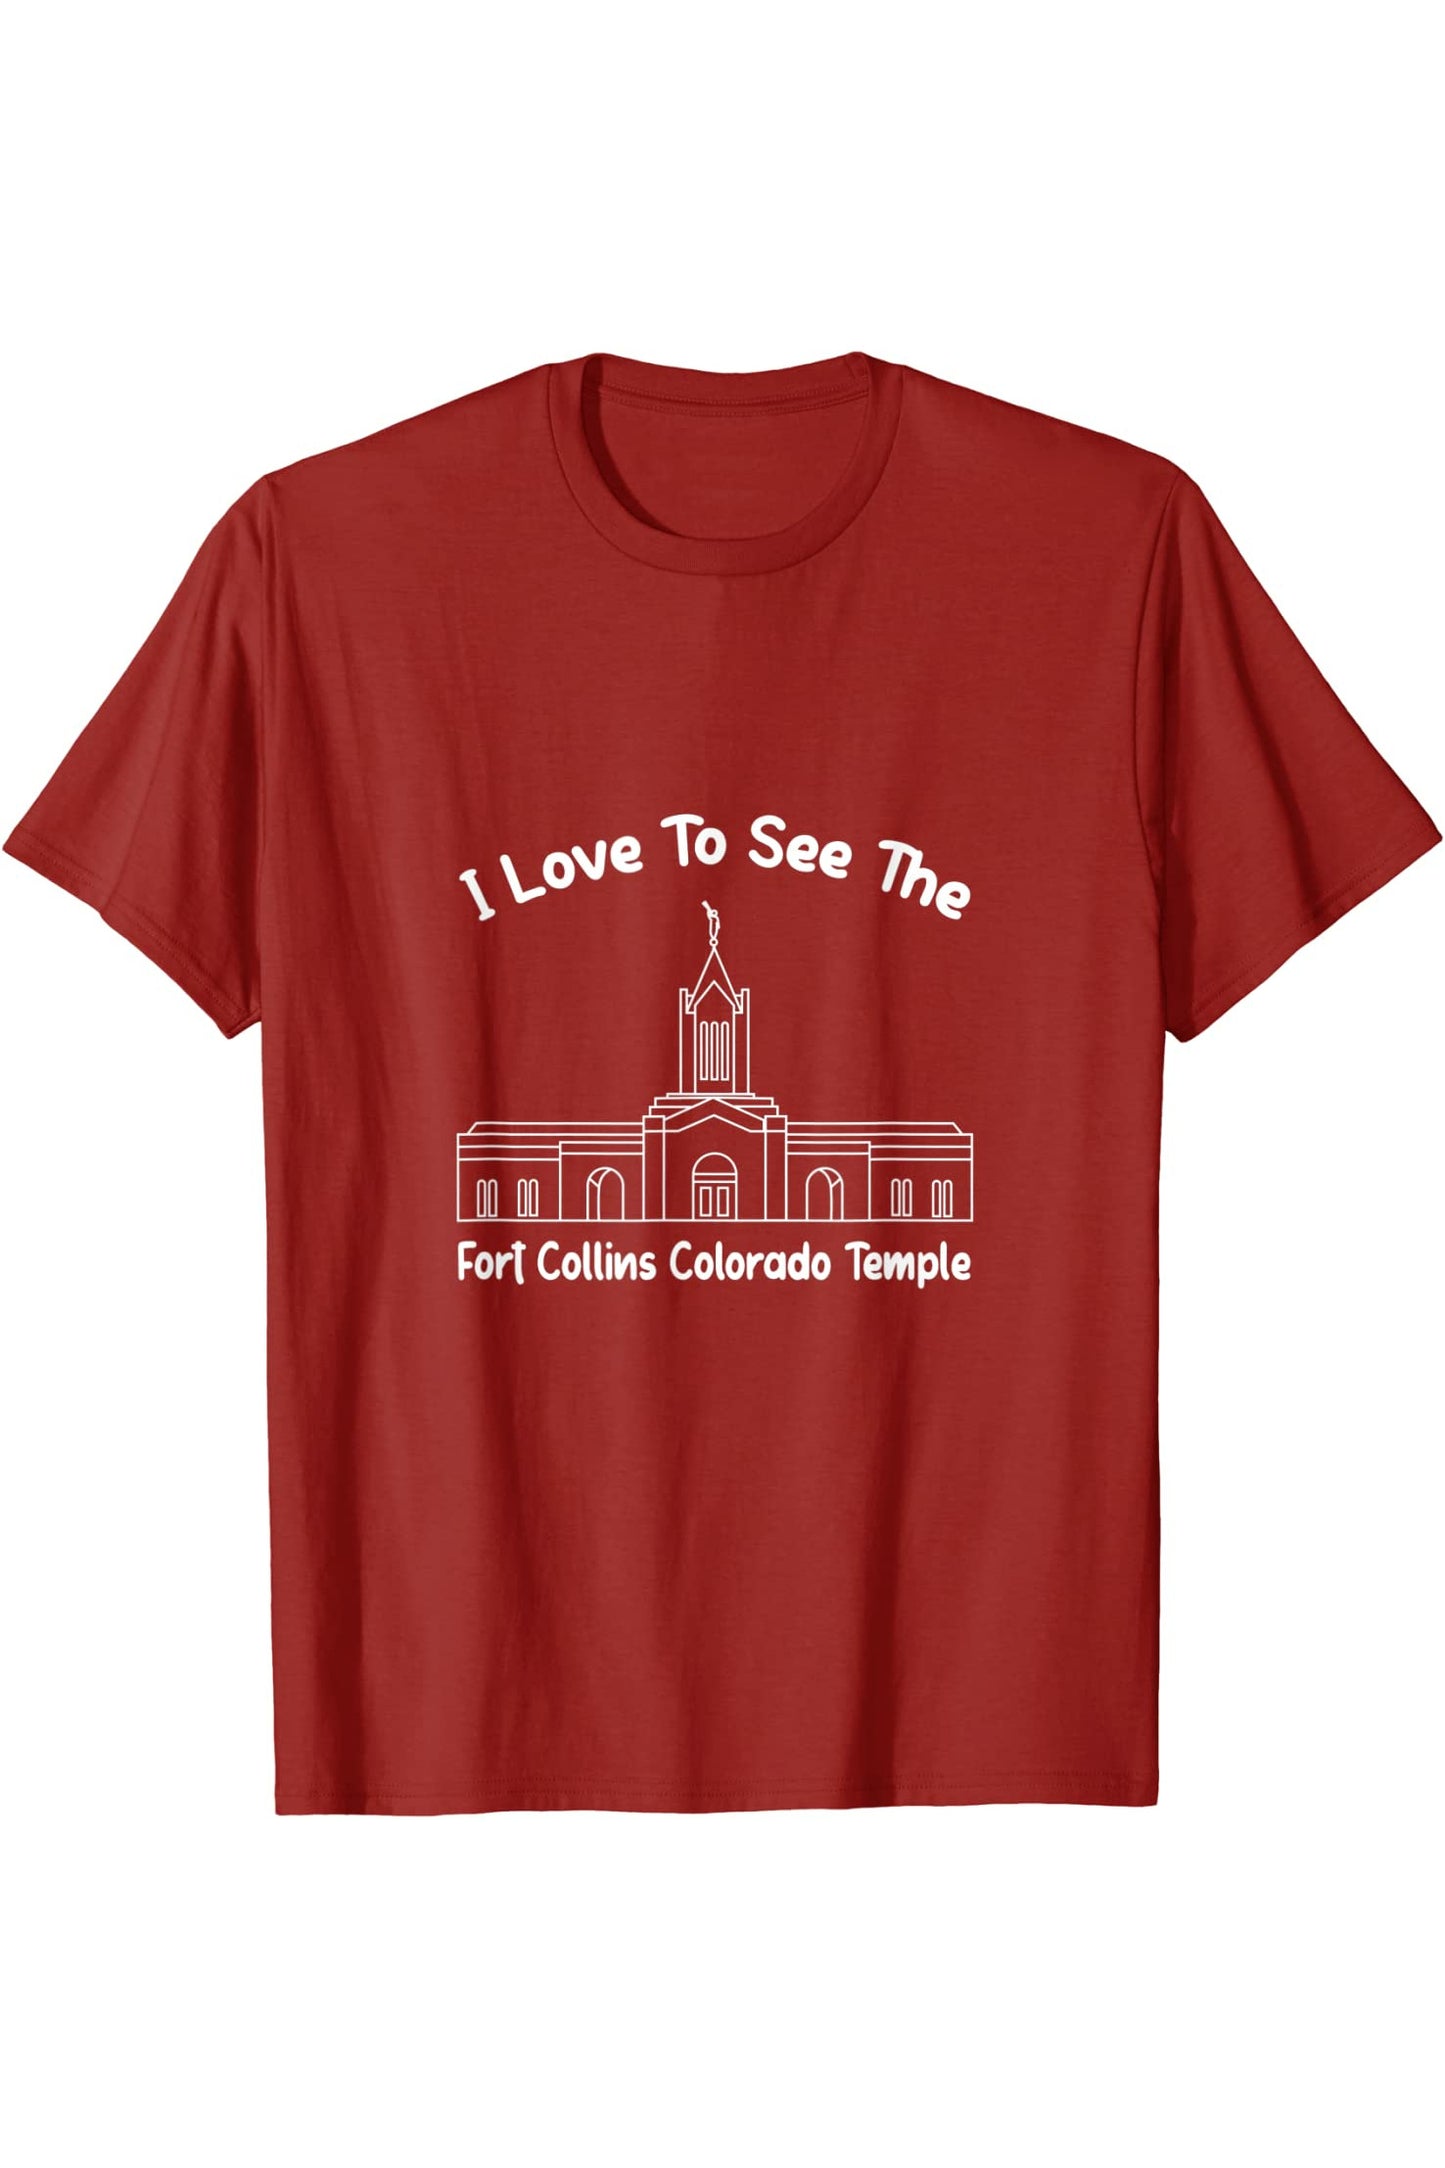 Fort Collins Colorado Temple T-Shirt - Primary Style (English) US